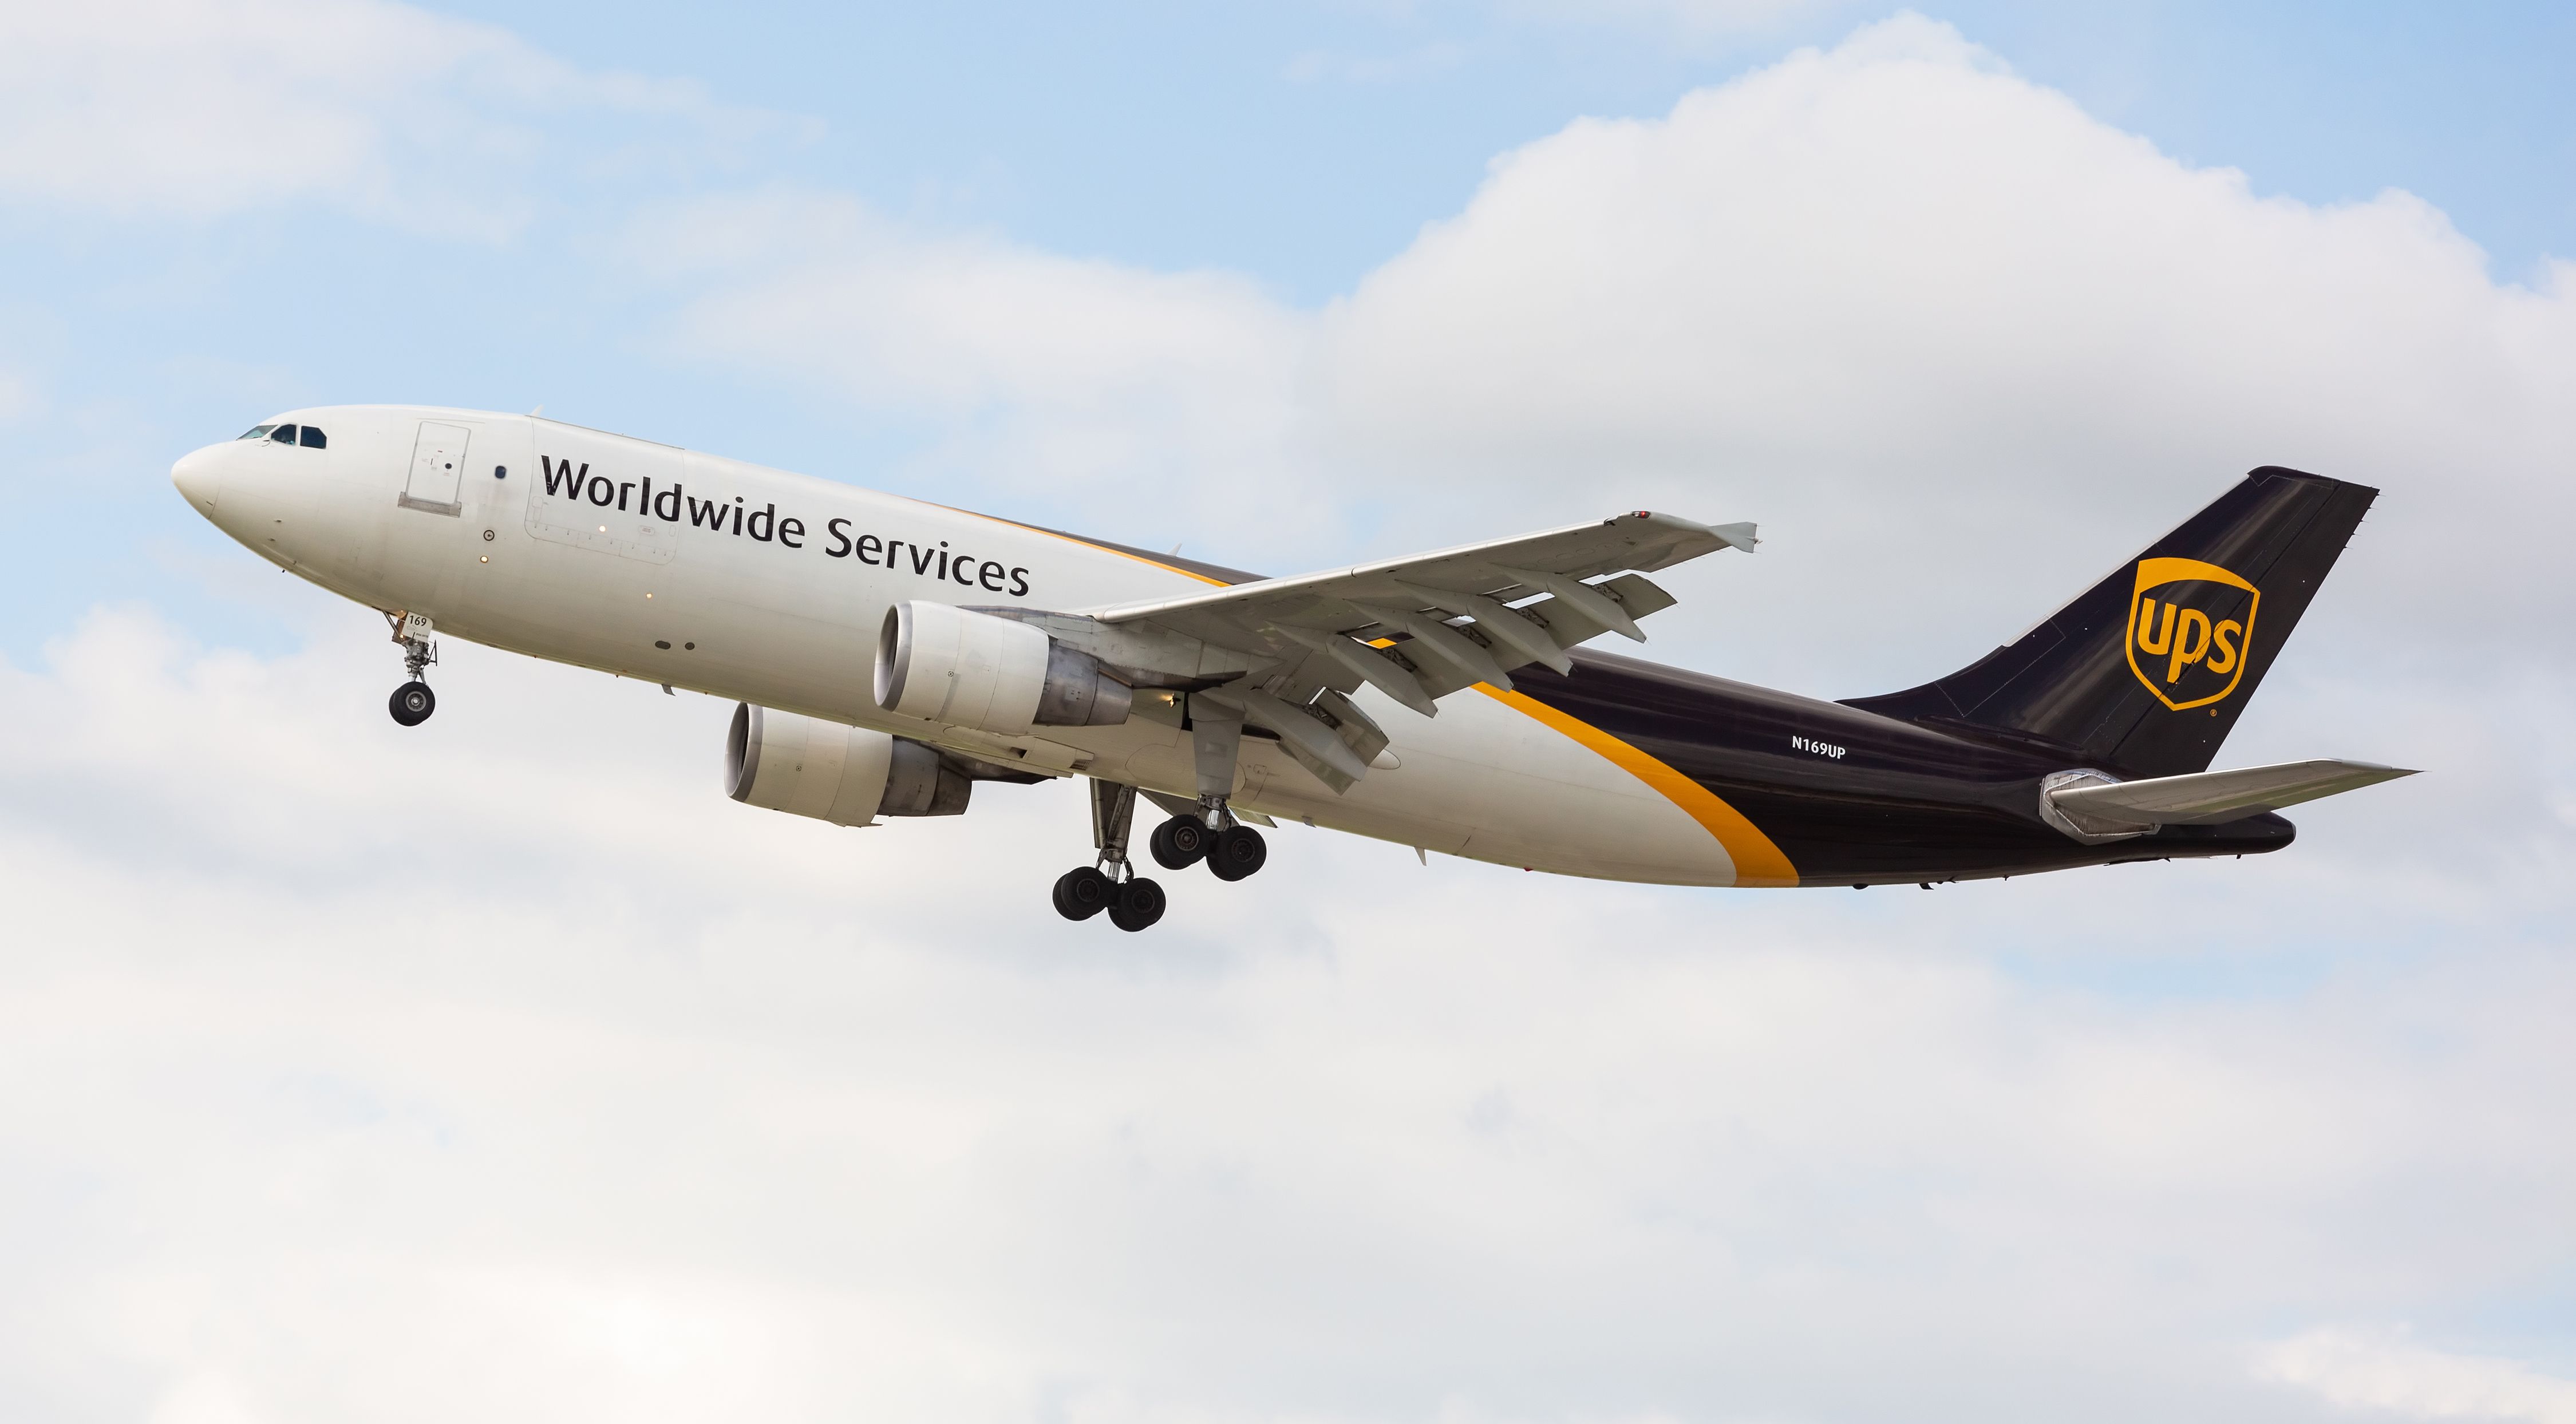 A UPS Airbus A300 about to land.